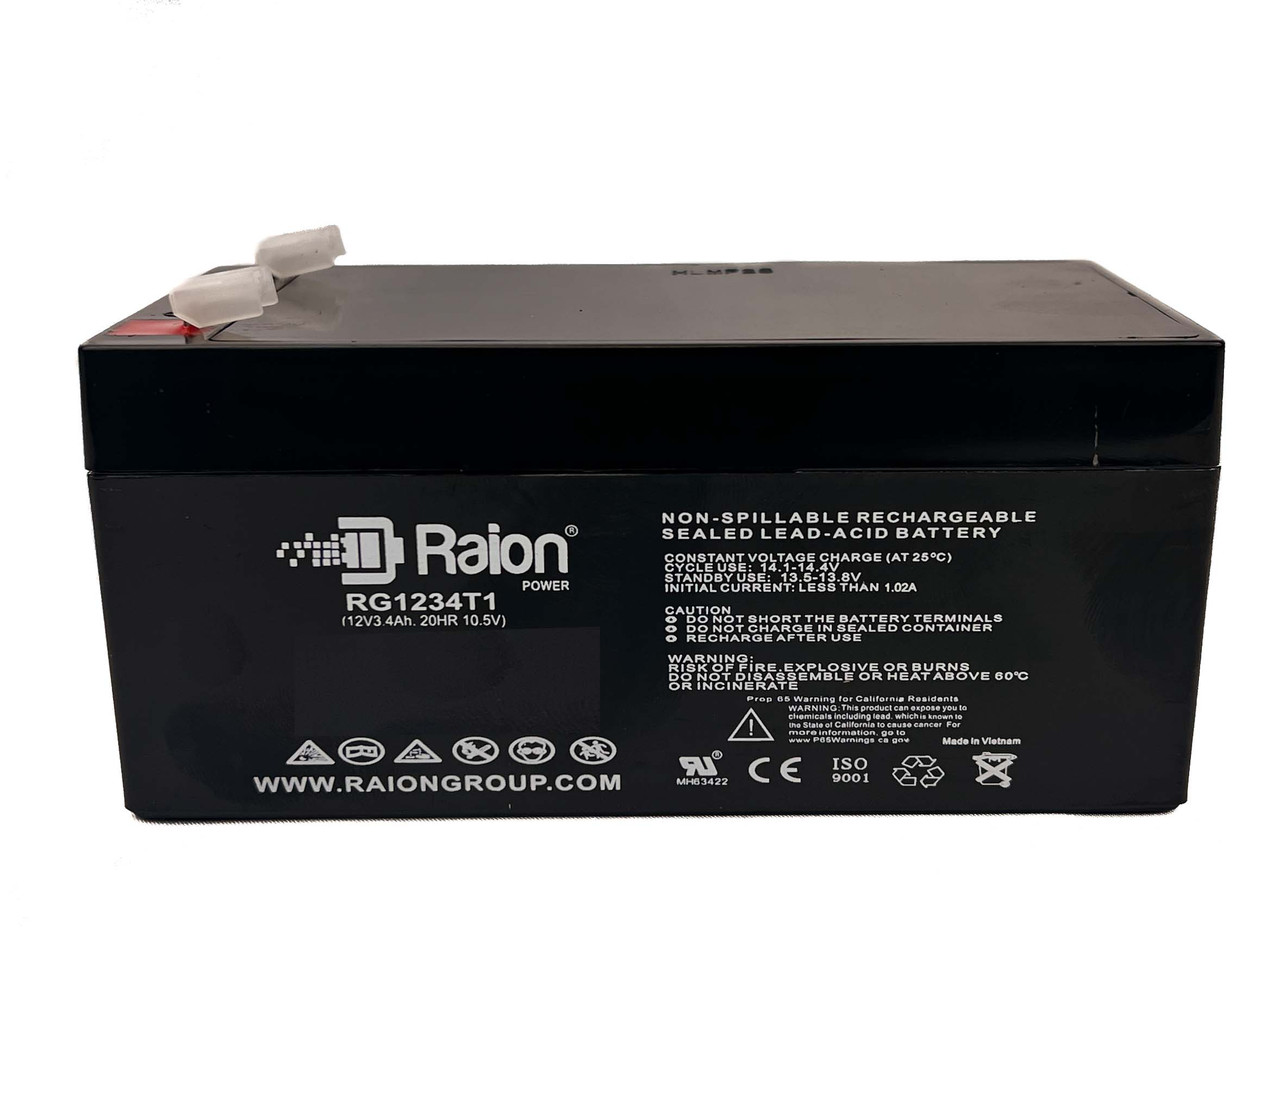 Raion Power RG1234T1 Rechargeable Compatible Replacement Battery for Vasworld Power GB12-3.4